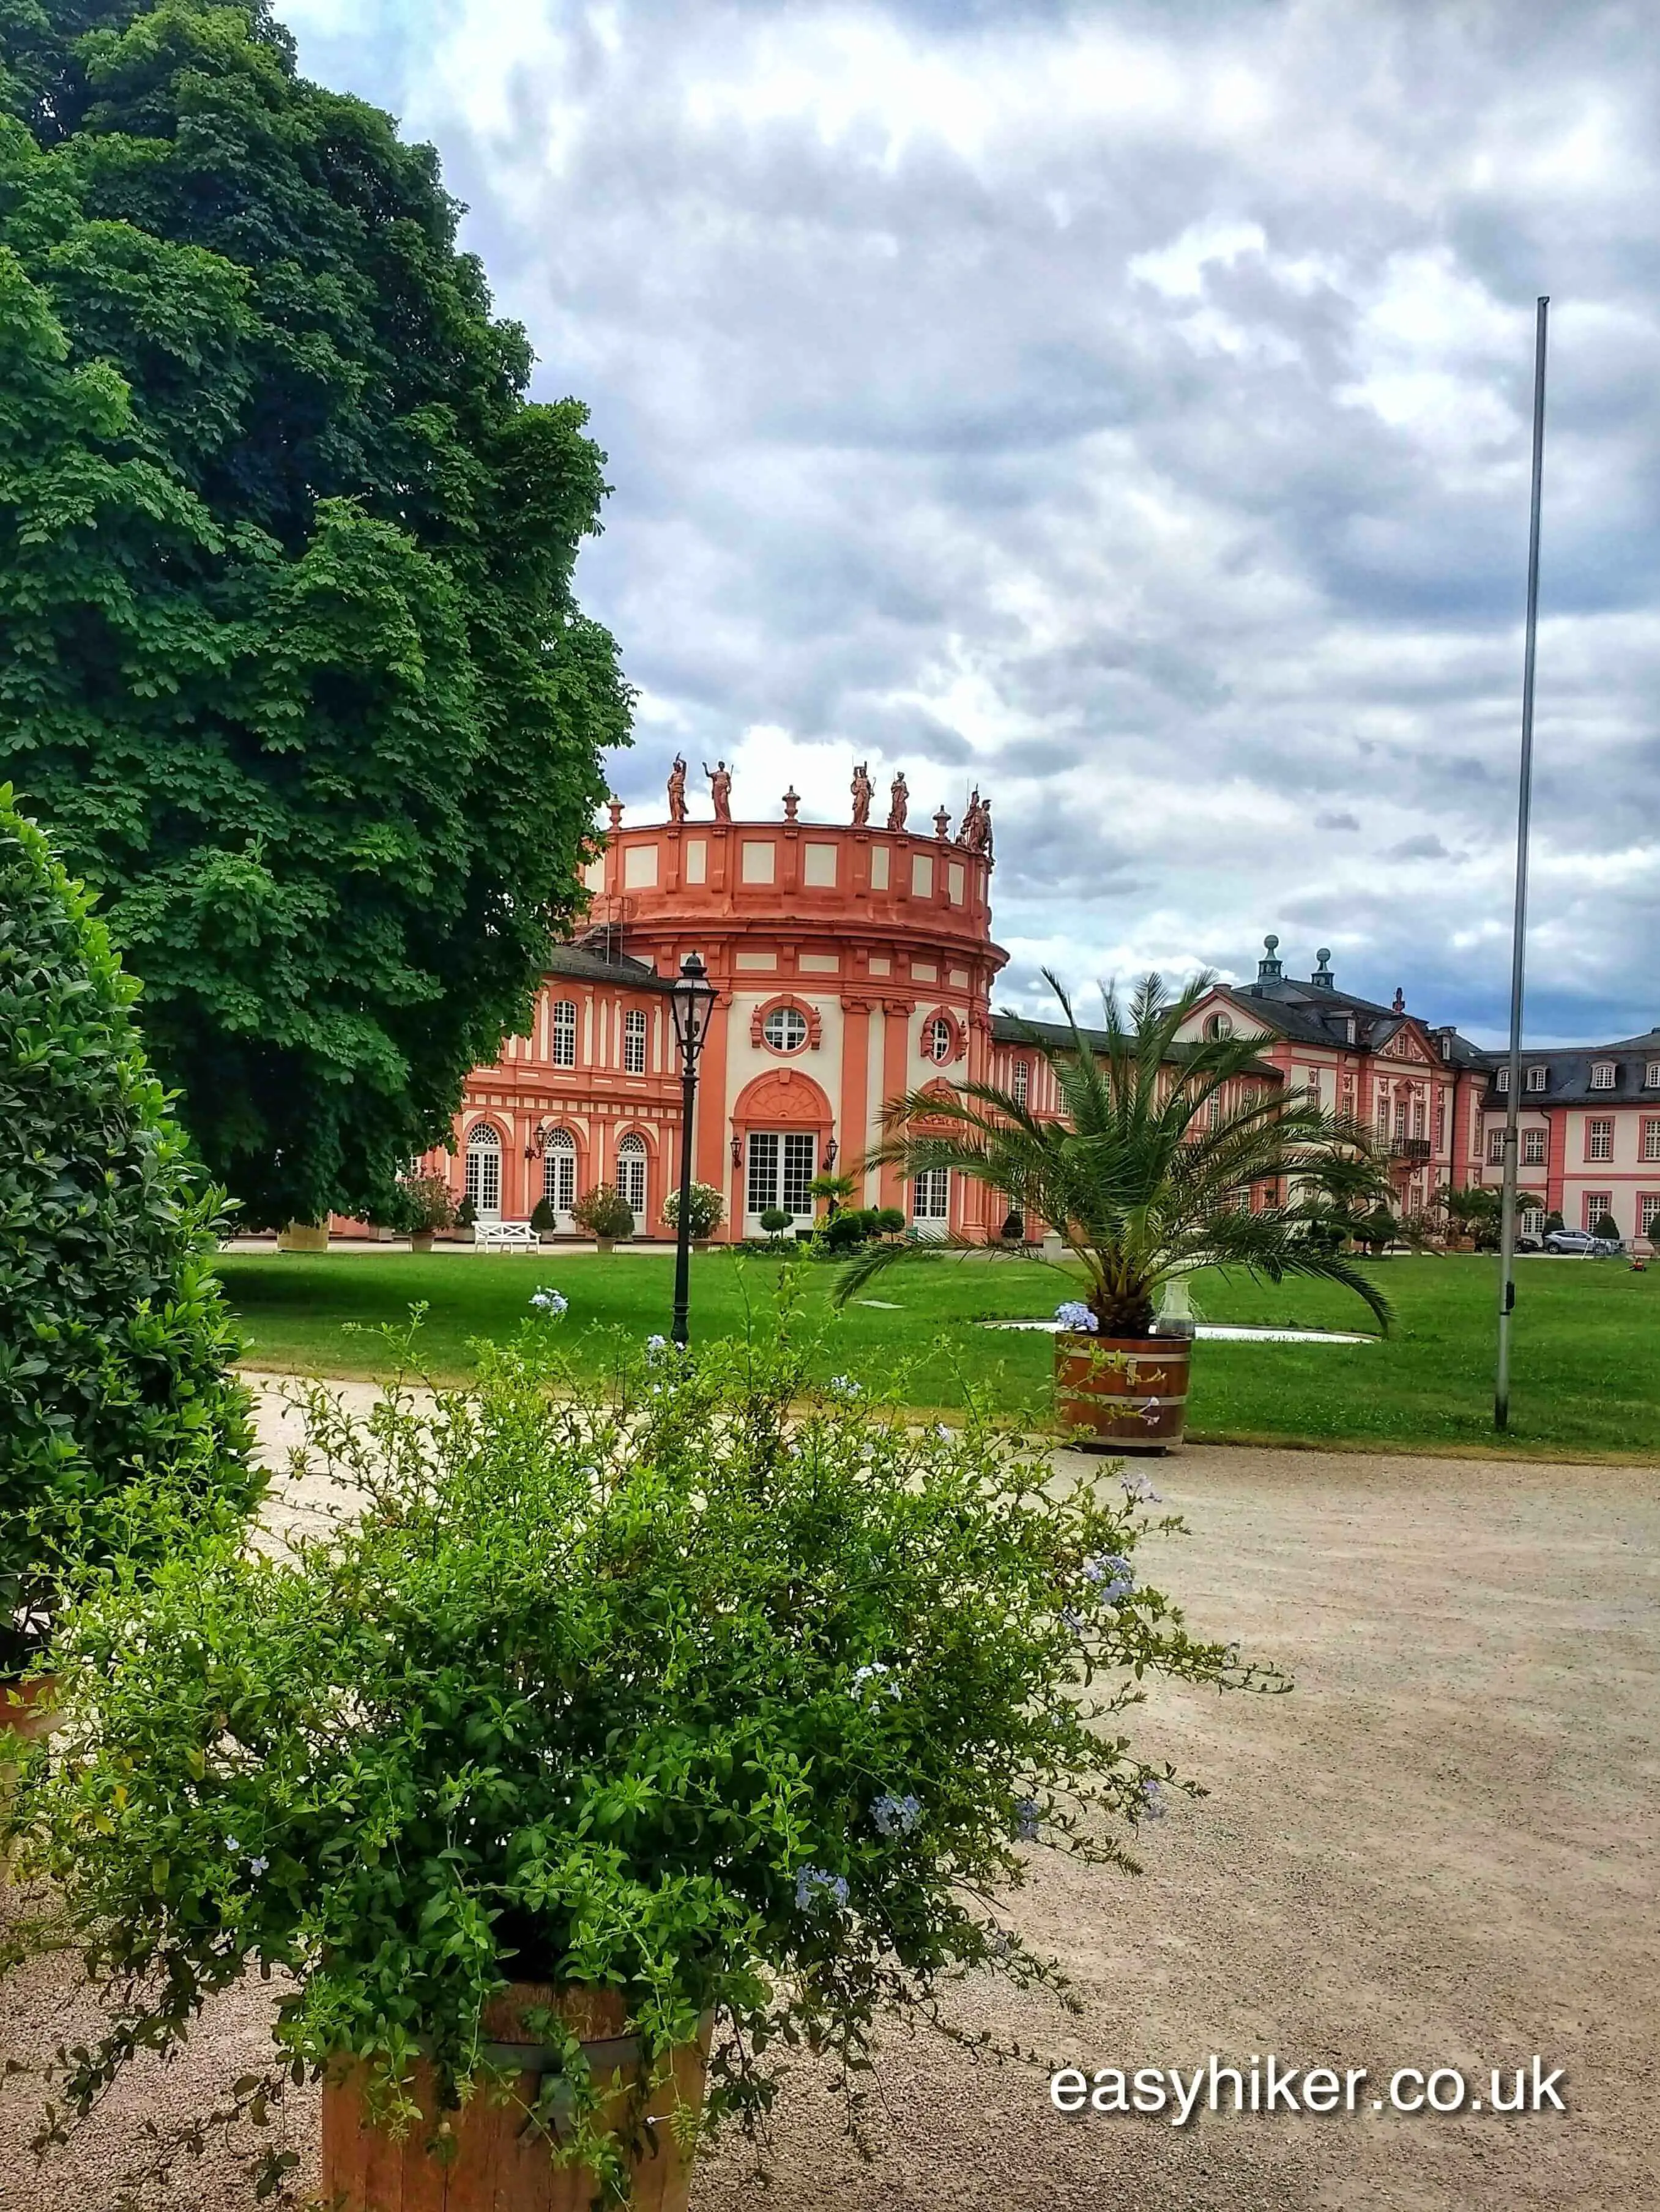 "Wiesbaden and the Sweetness of Life"